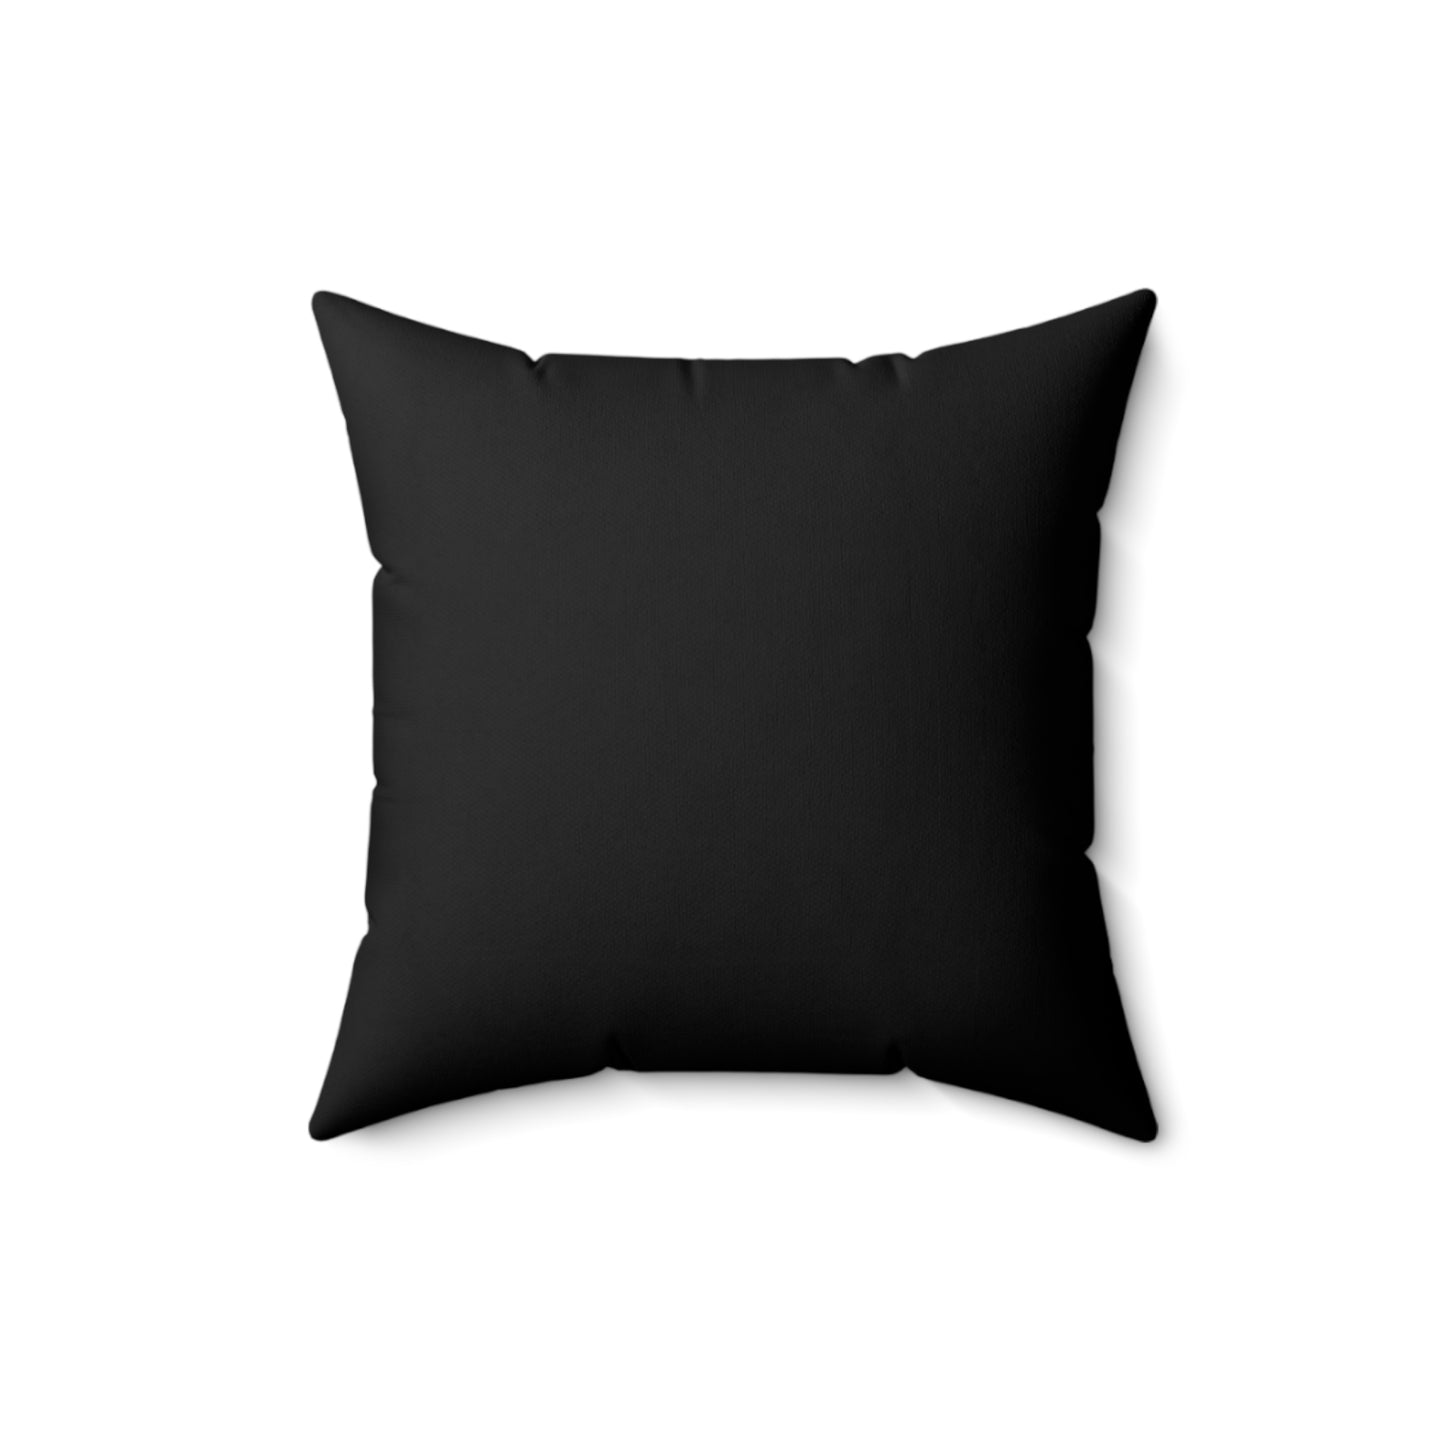 The Rules Throw Pillow